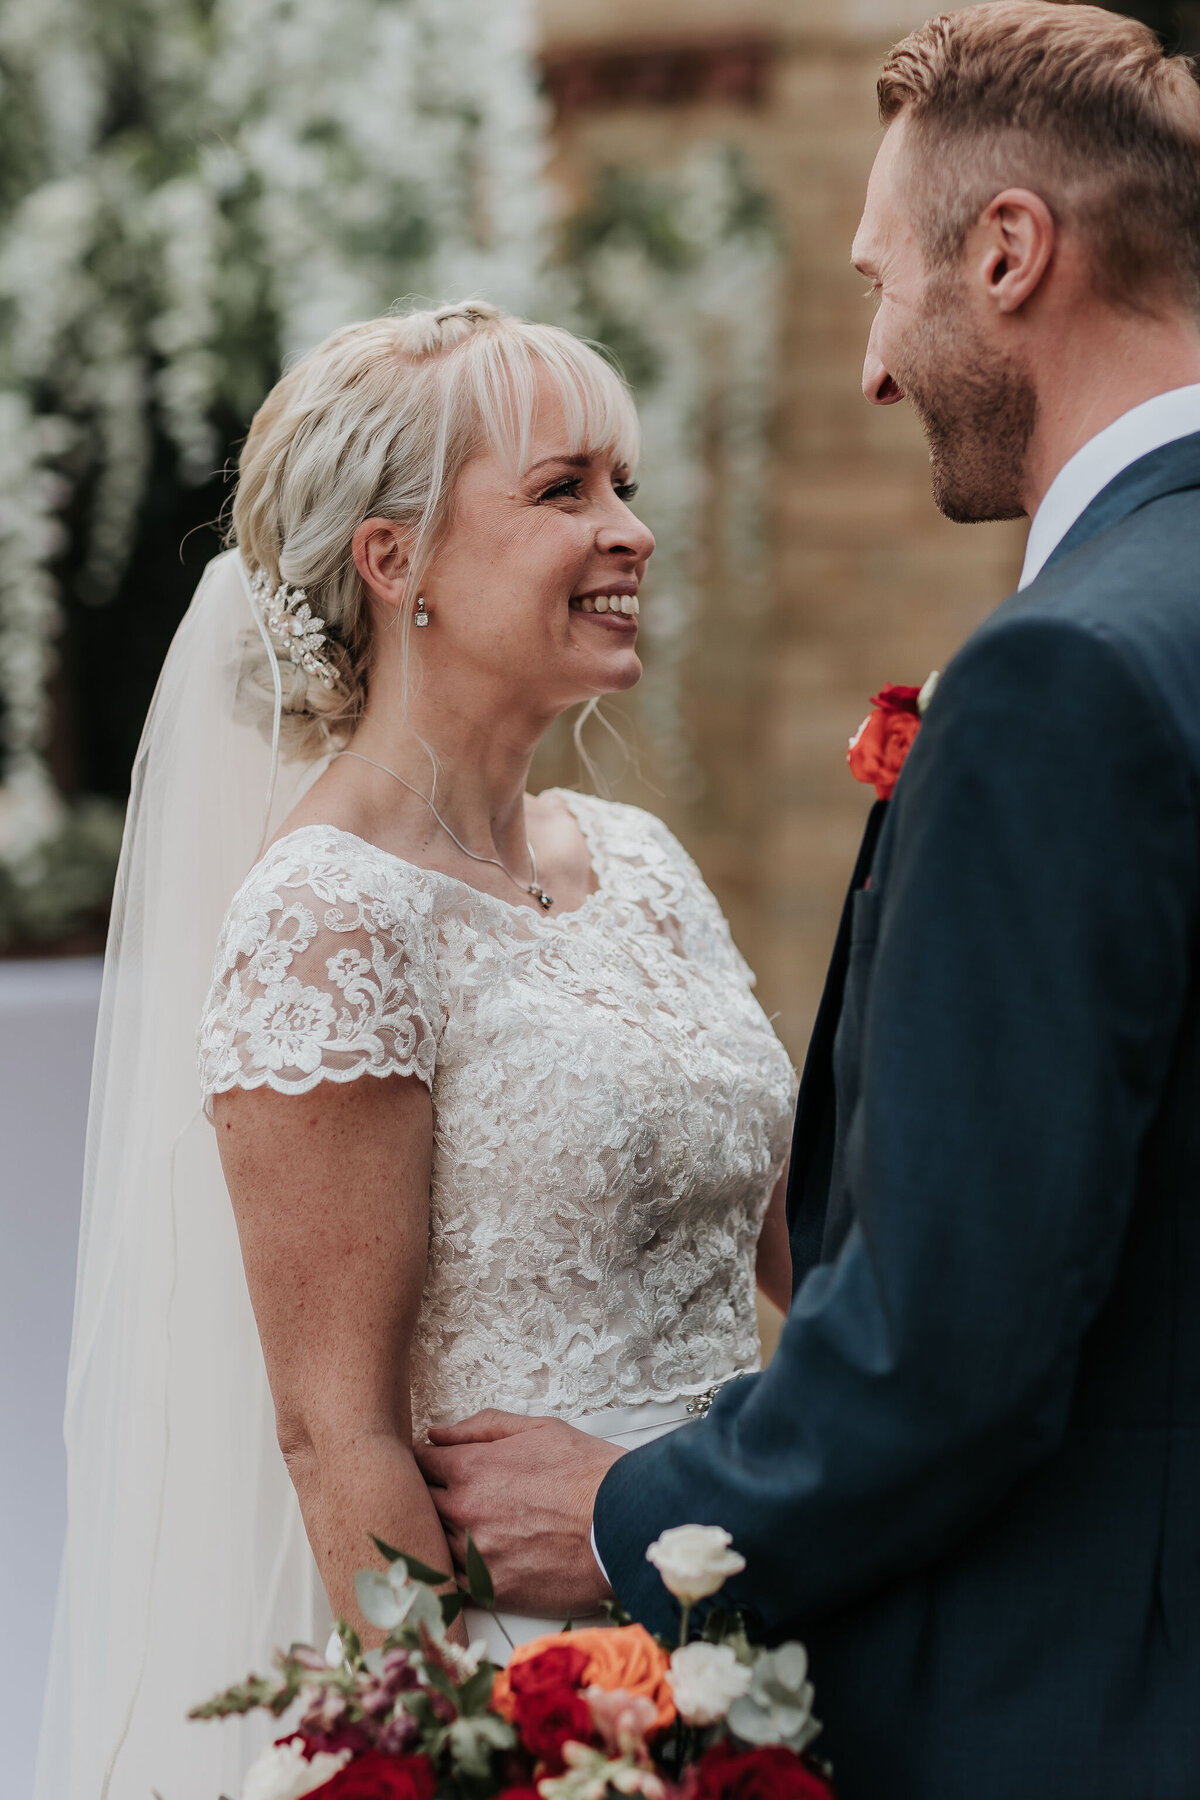 Bride smiles at her Groom wearing stunning lace dress at their Autumn wedding at The Ravenswood